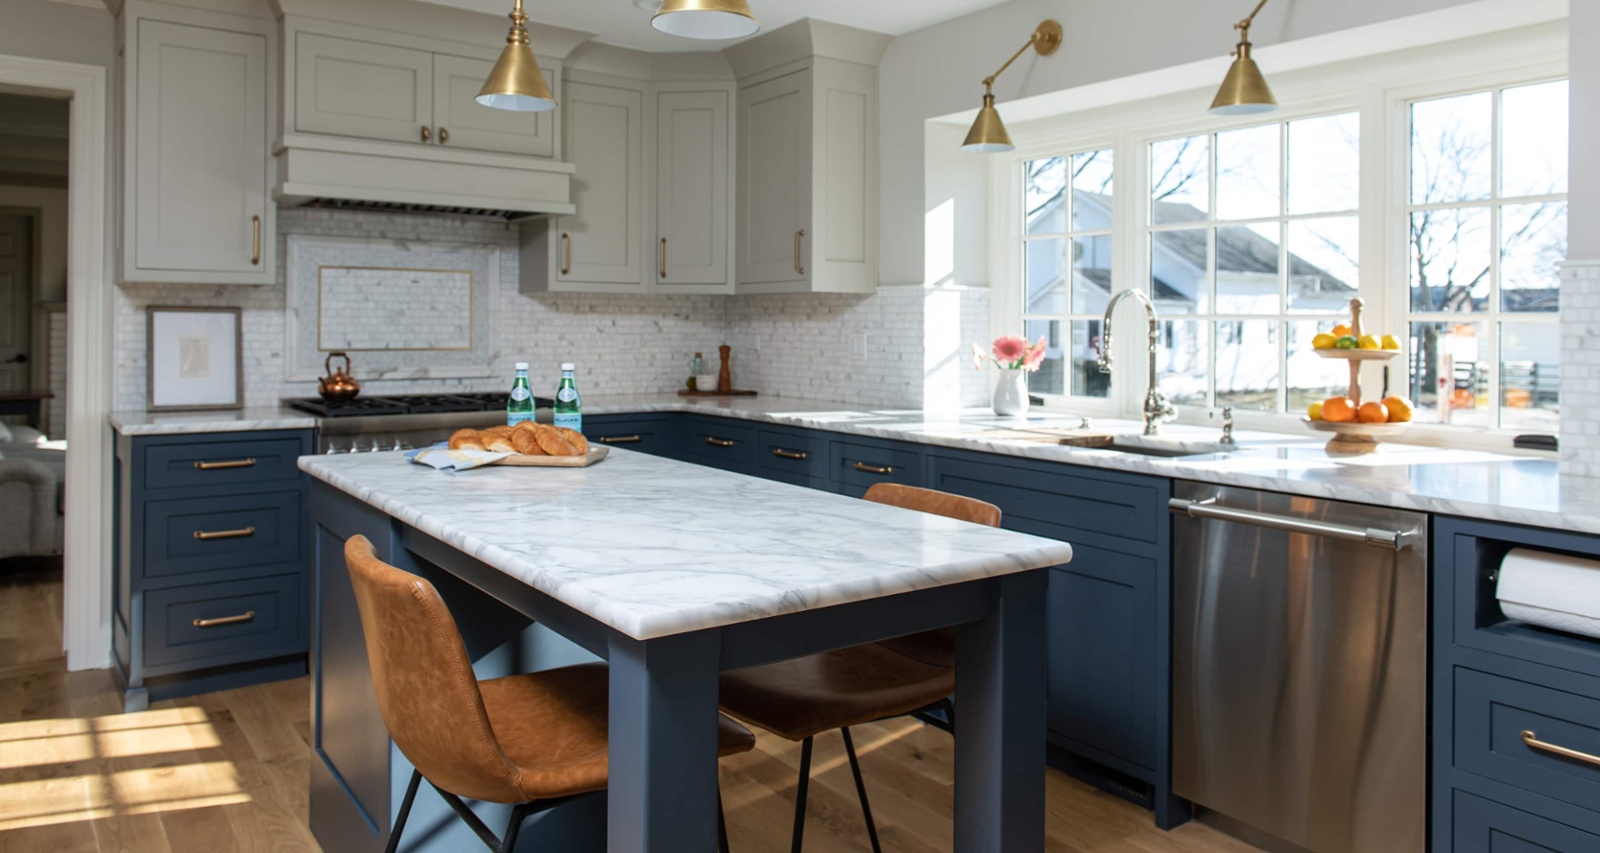 kitchen remodel addition with two best colors for kitchen cabinets - hale navy and Revere Pewter-1-1